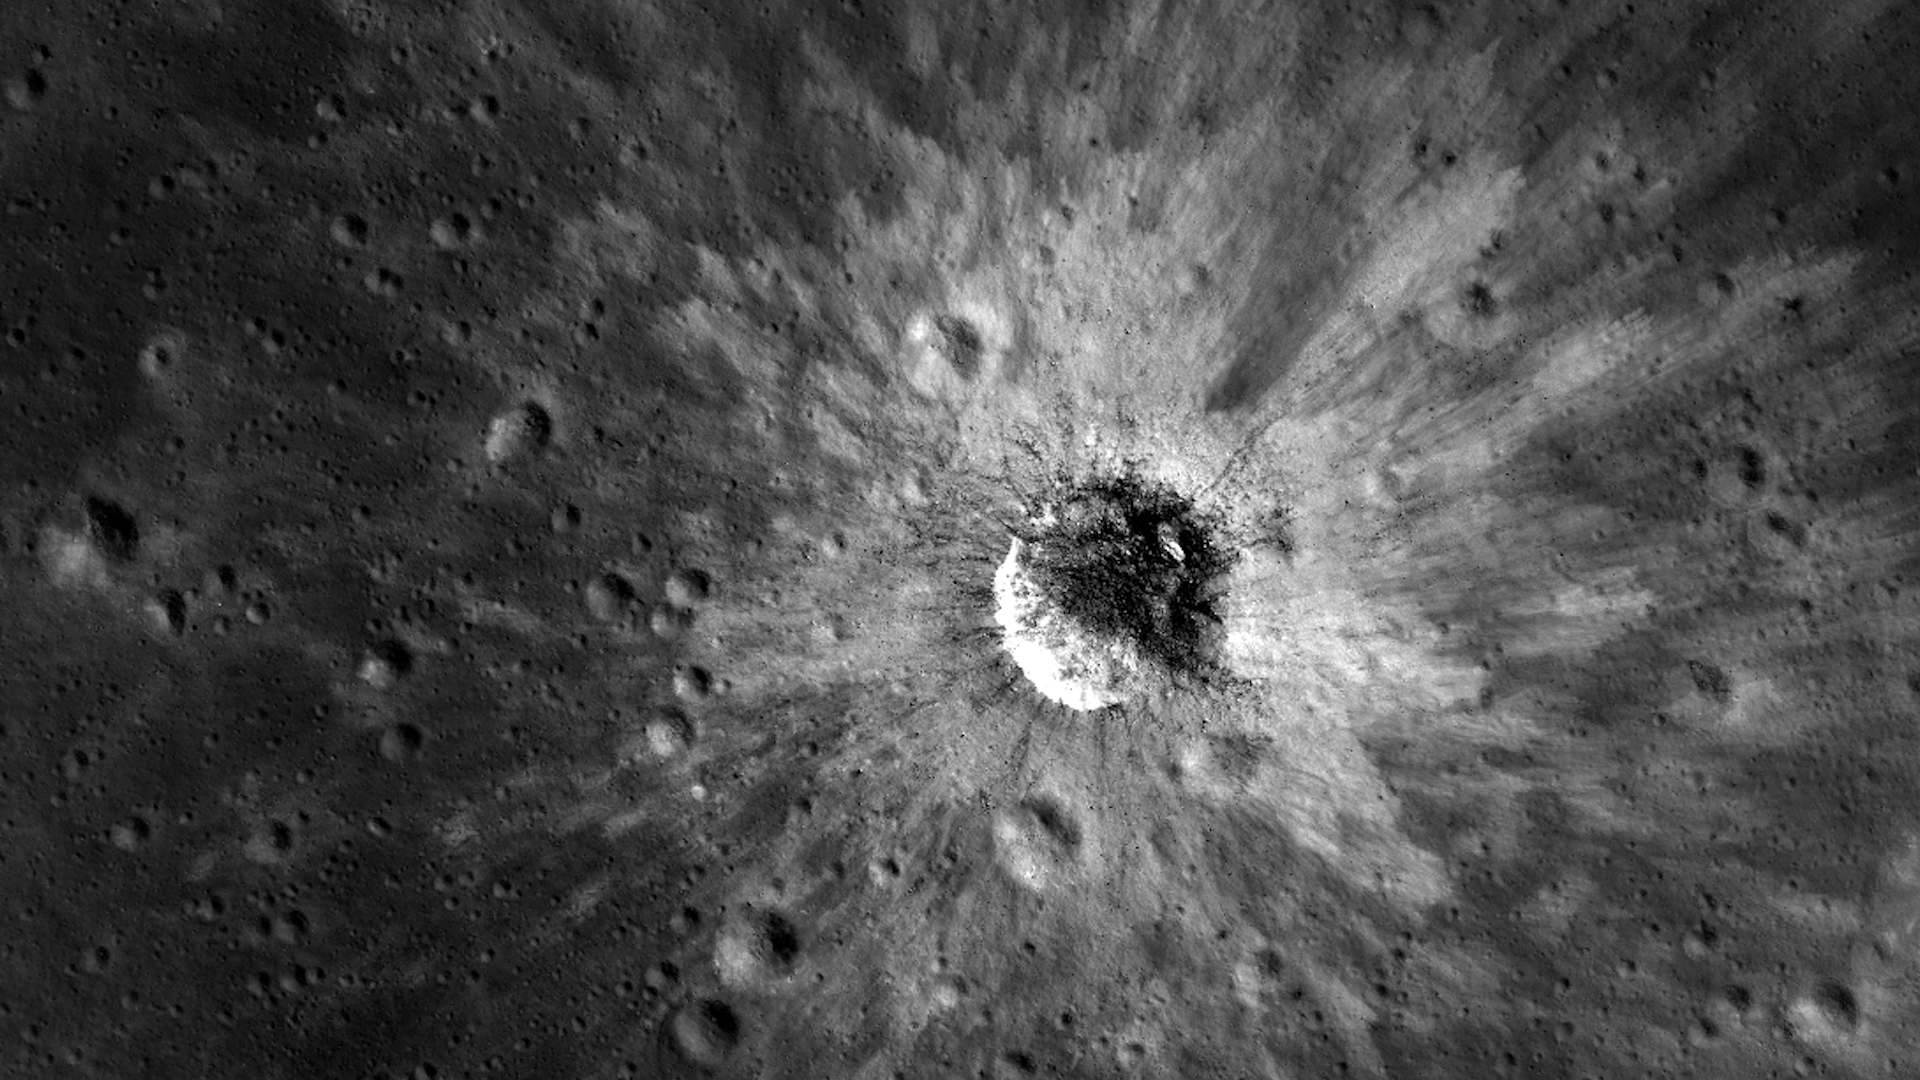 This video showcases how LRO's instruments and data they collect continue to help scientists make important discoveries about the Moon.Watch this video on the NASA Goddard YouTube channel.